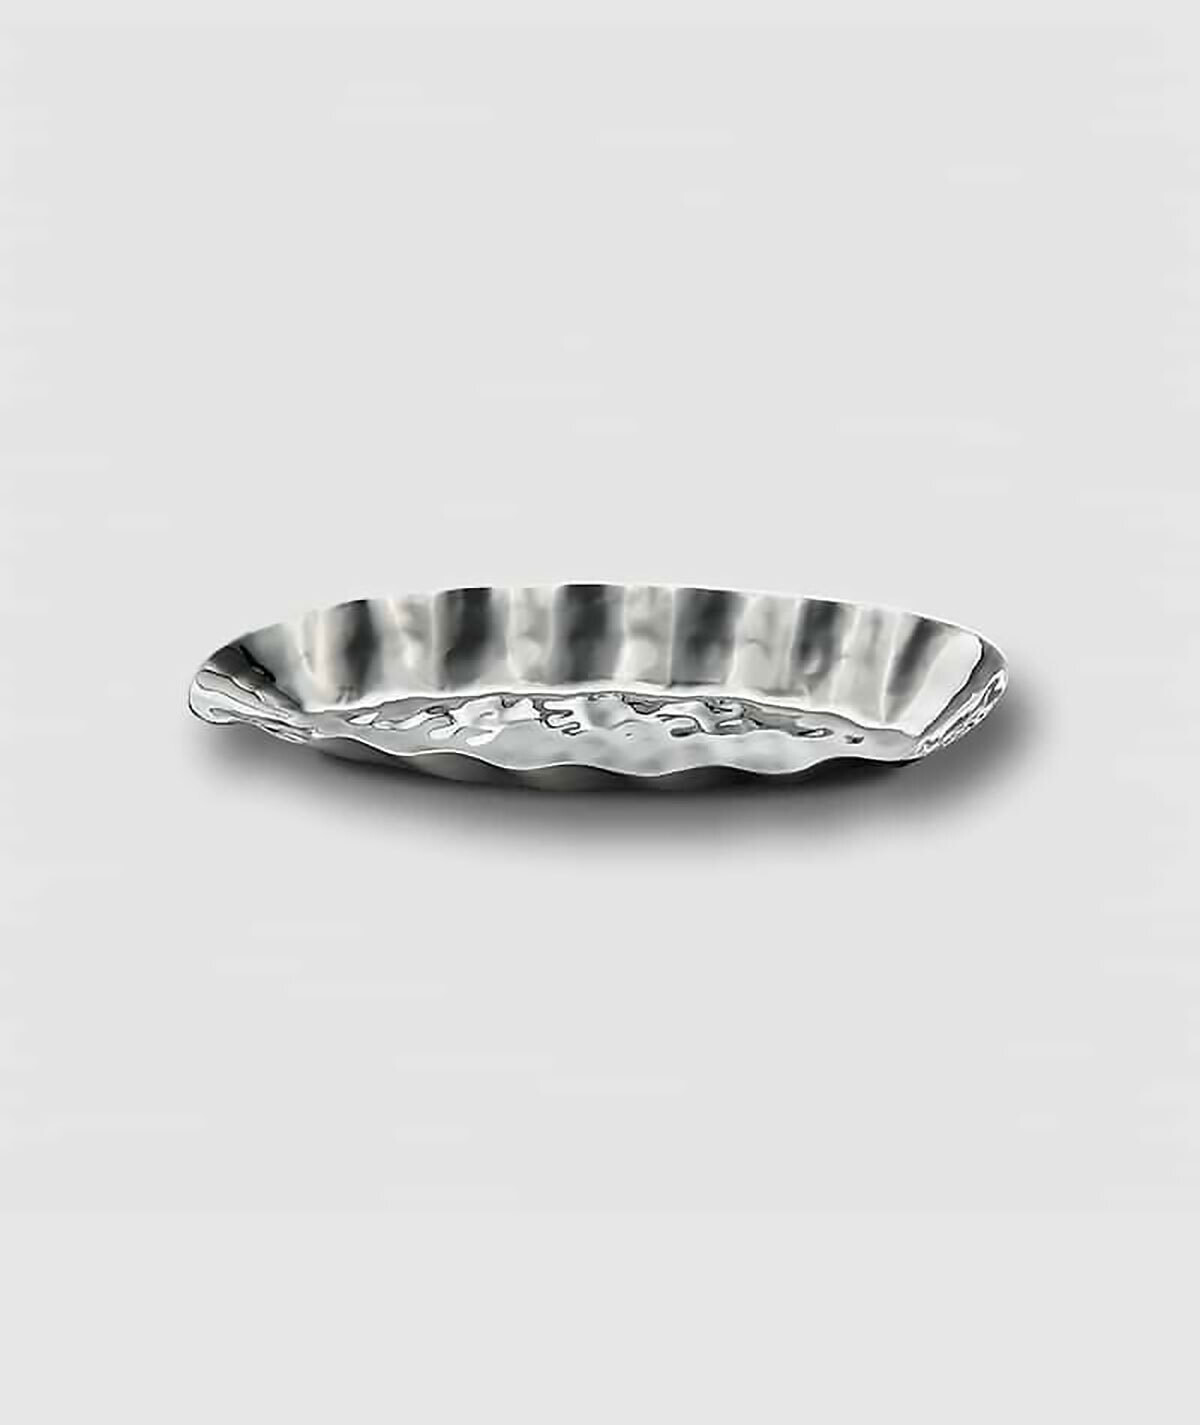 Mary Jurek Free Form Oval Stainless Tray 13" x 4 1/4" x 1 1/4" BLSMX004